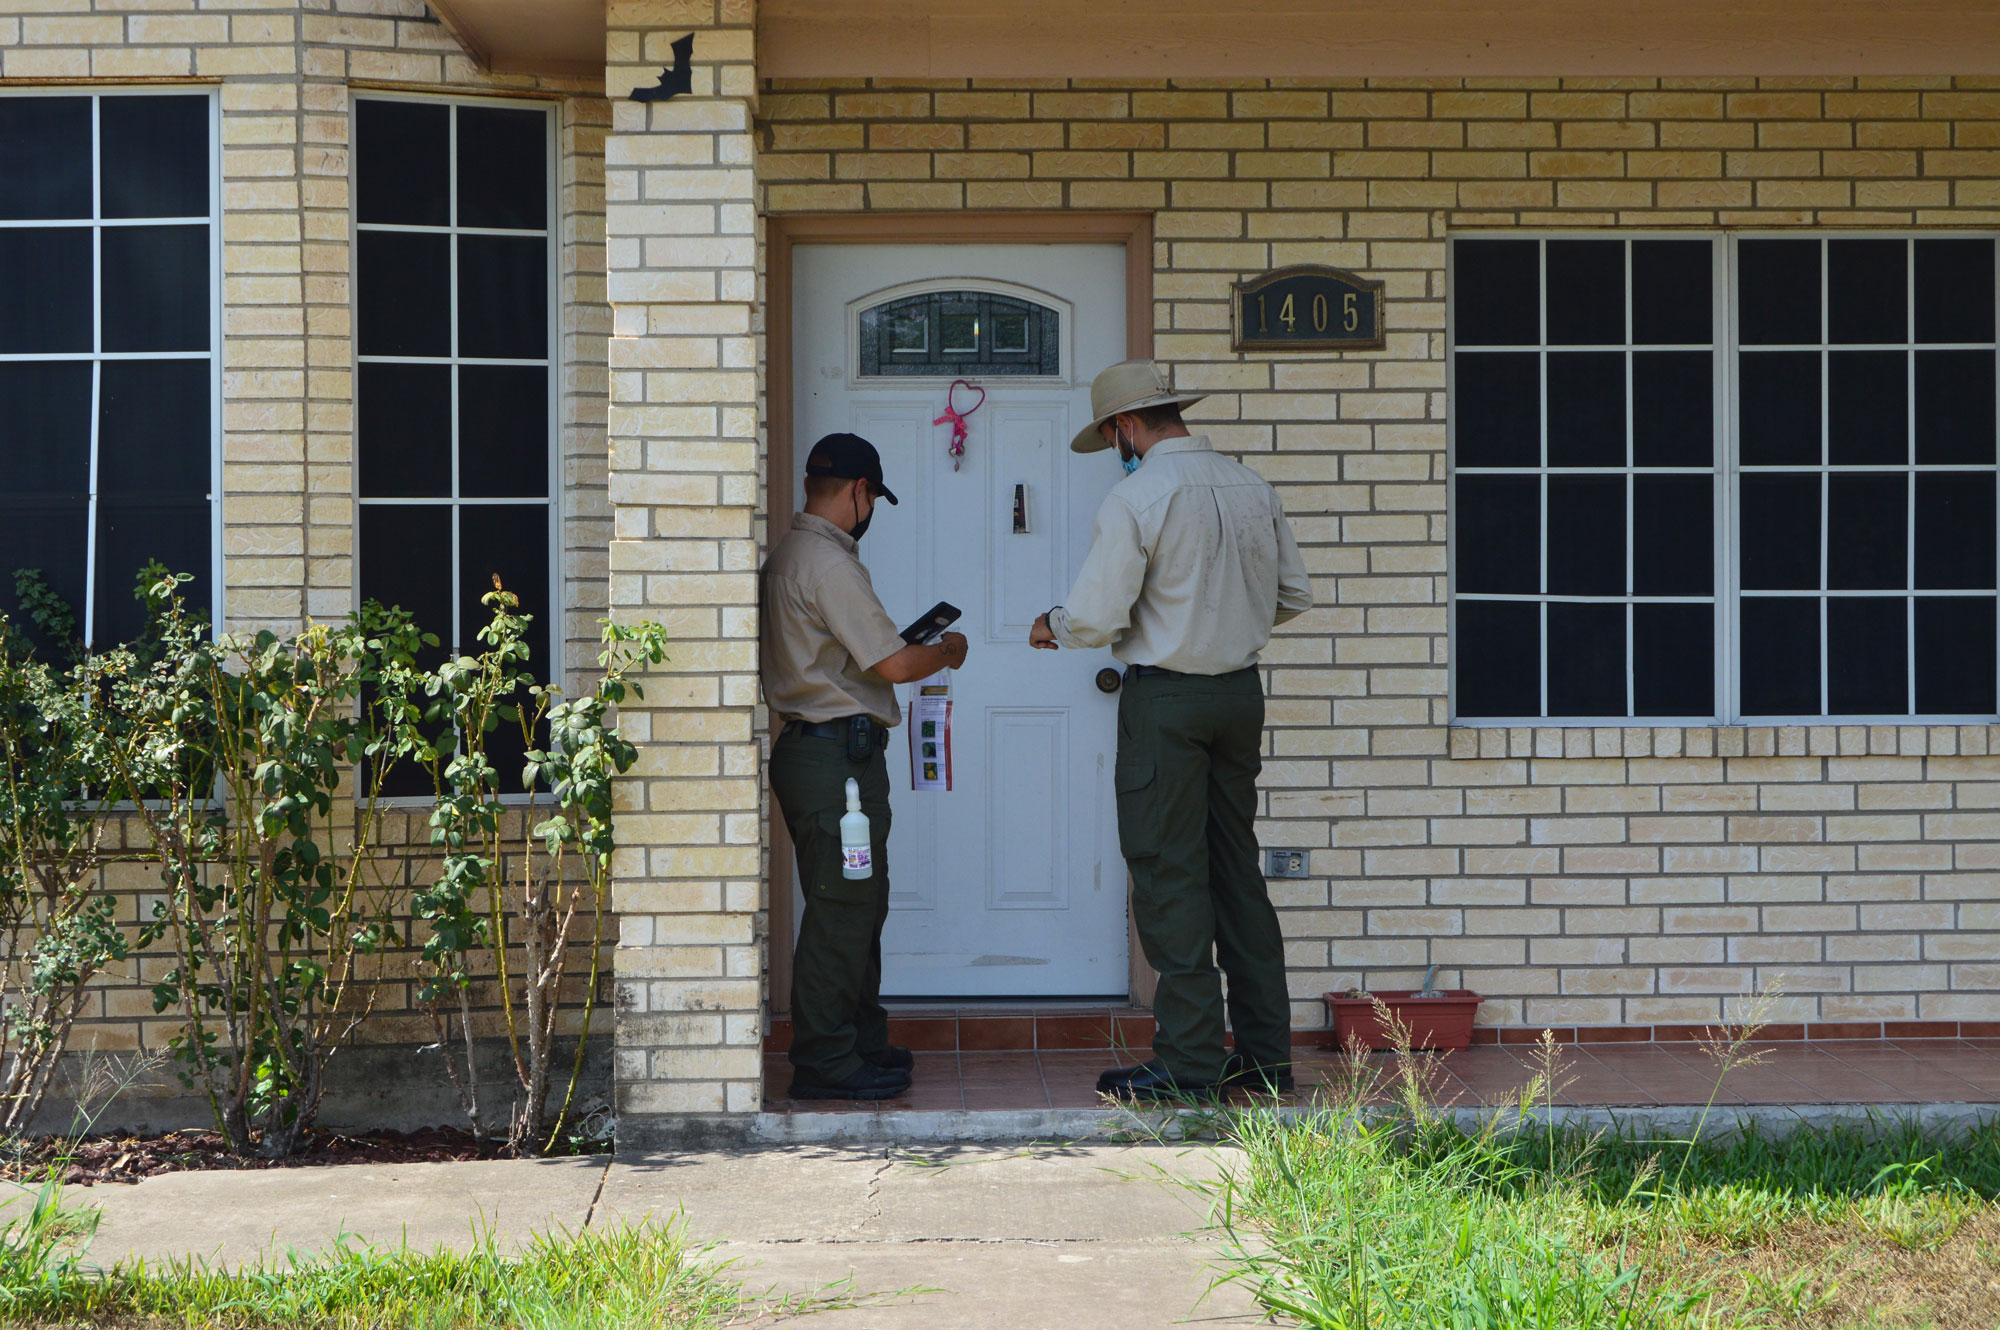 APHIS CHRP inspectors Juan Rodriguez and Eva Flores arrive to evaluate backyard citrus trees in a Pharr, Texas community